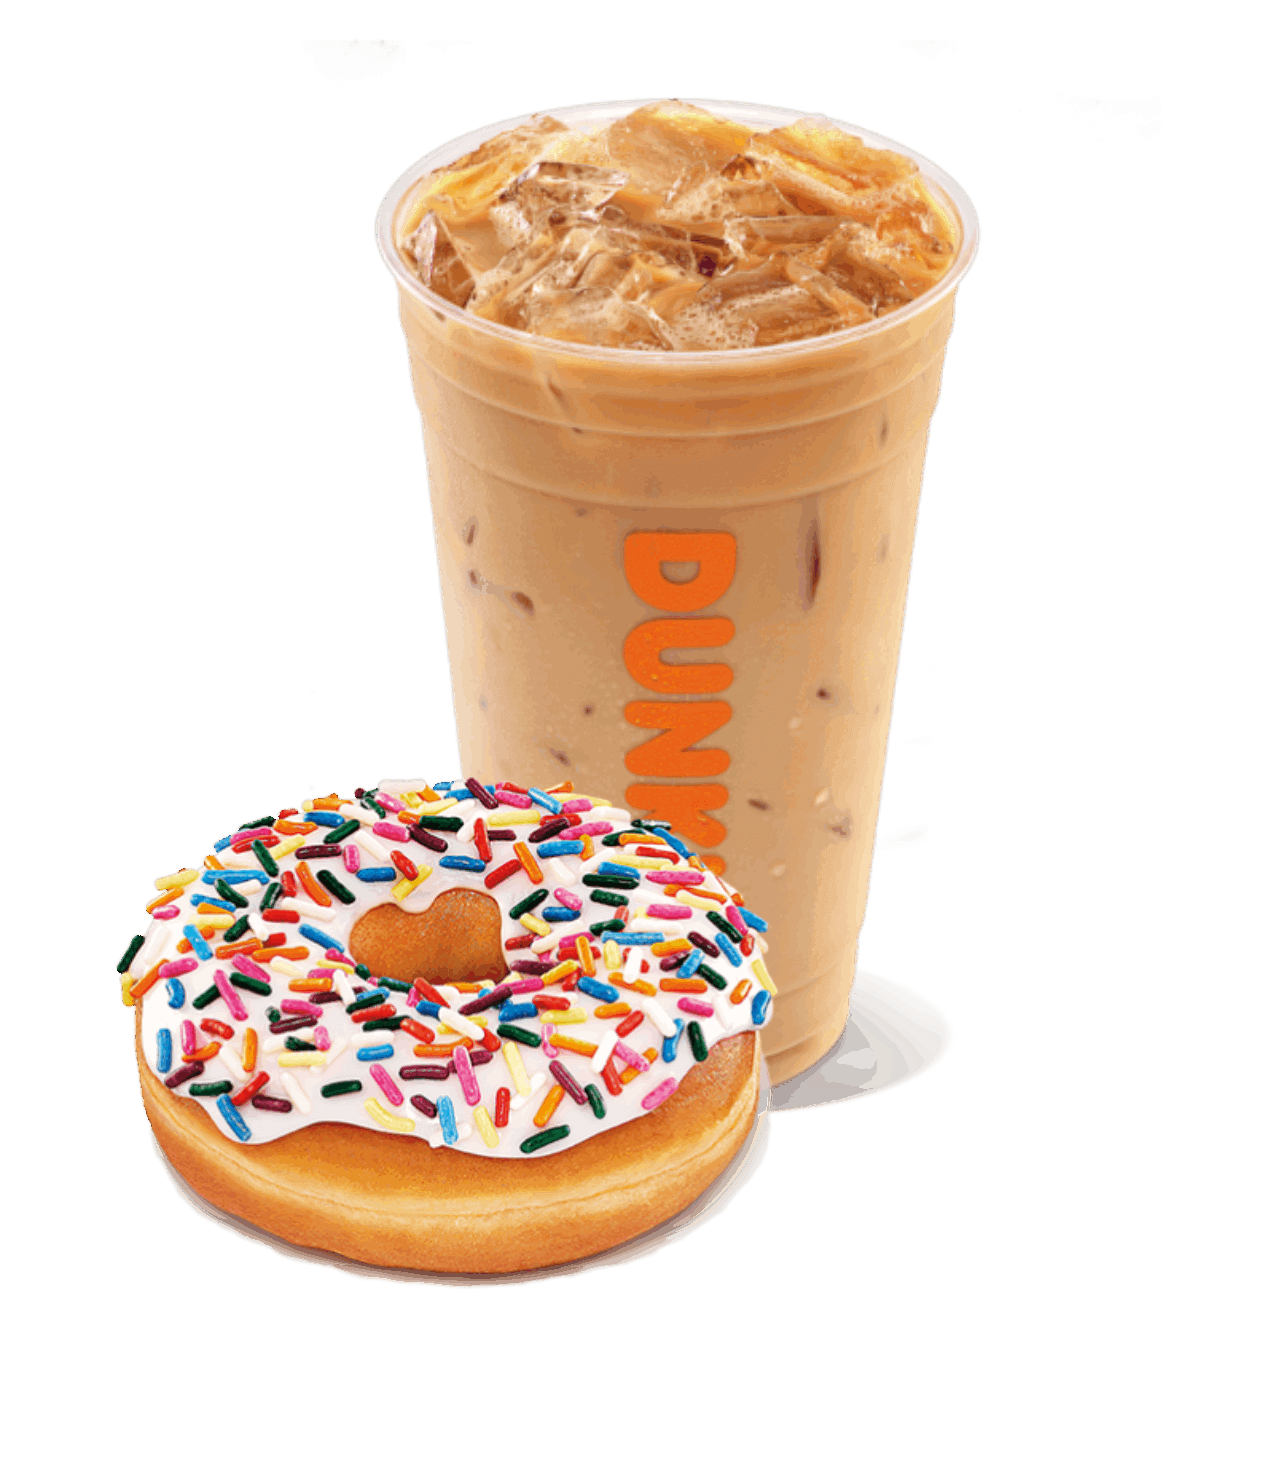 Iced coffee in a cup with the "Dunkin'" logo and a frosted donut with colorful sprinkles, exemplifying the classic offerings of this beloved coffee and donuts franchise.